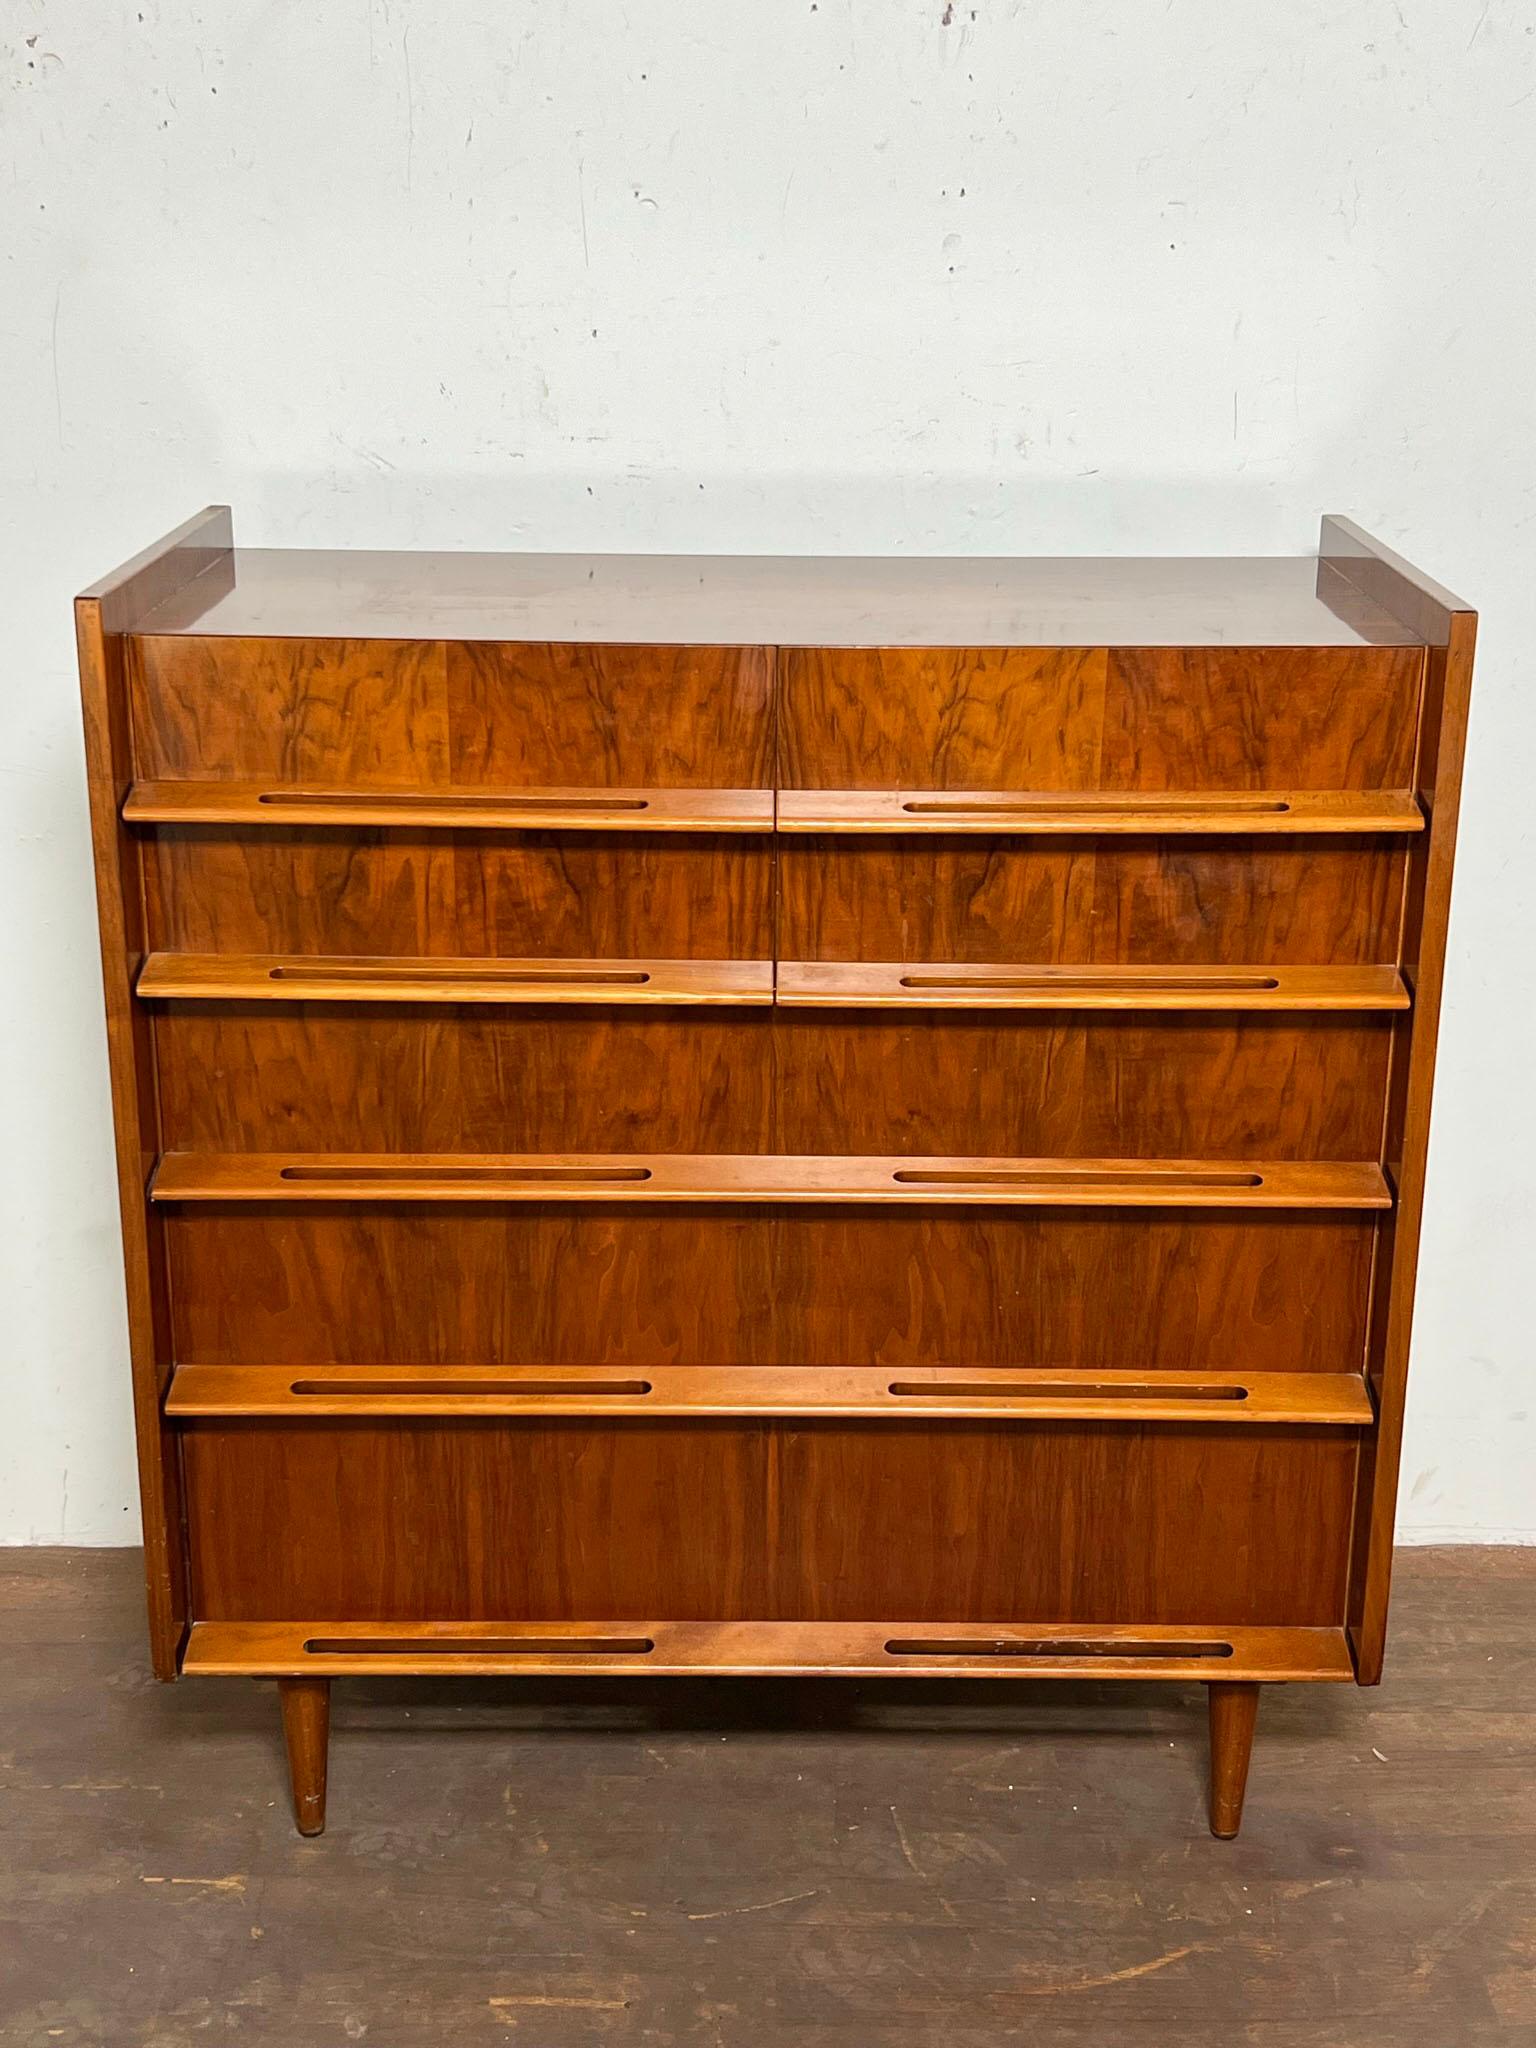 A seven drawer dresser from the Coronation Collection by Edmond Spence, introduced in 1953 as a tribute to that year’s crowning of Queen Elizabeth. Book matched teak with contrasting full length birch handles featuring slotted finger pulls.



